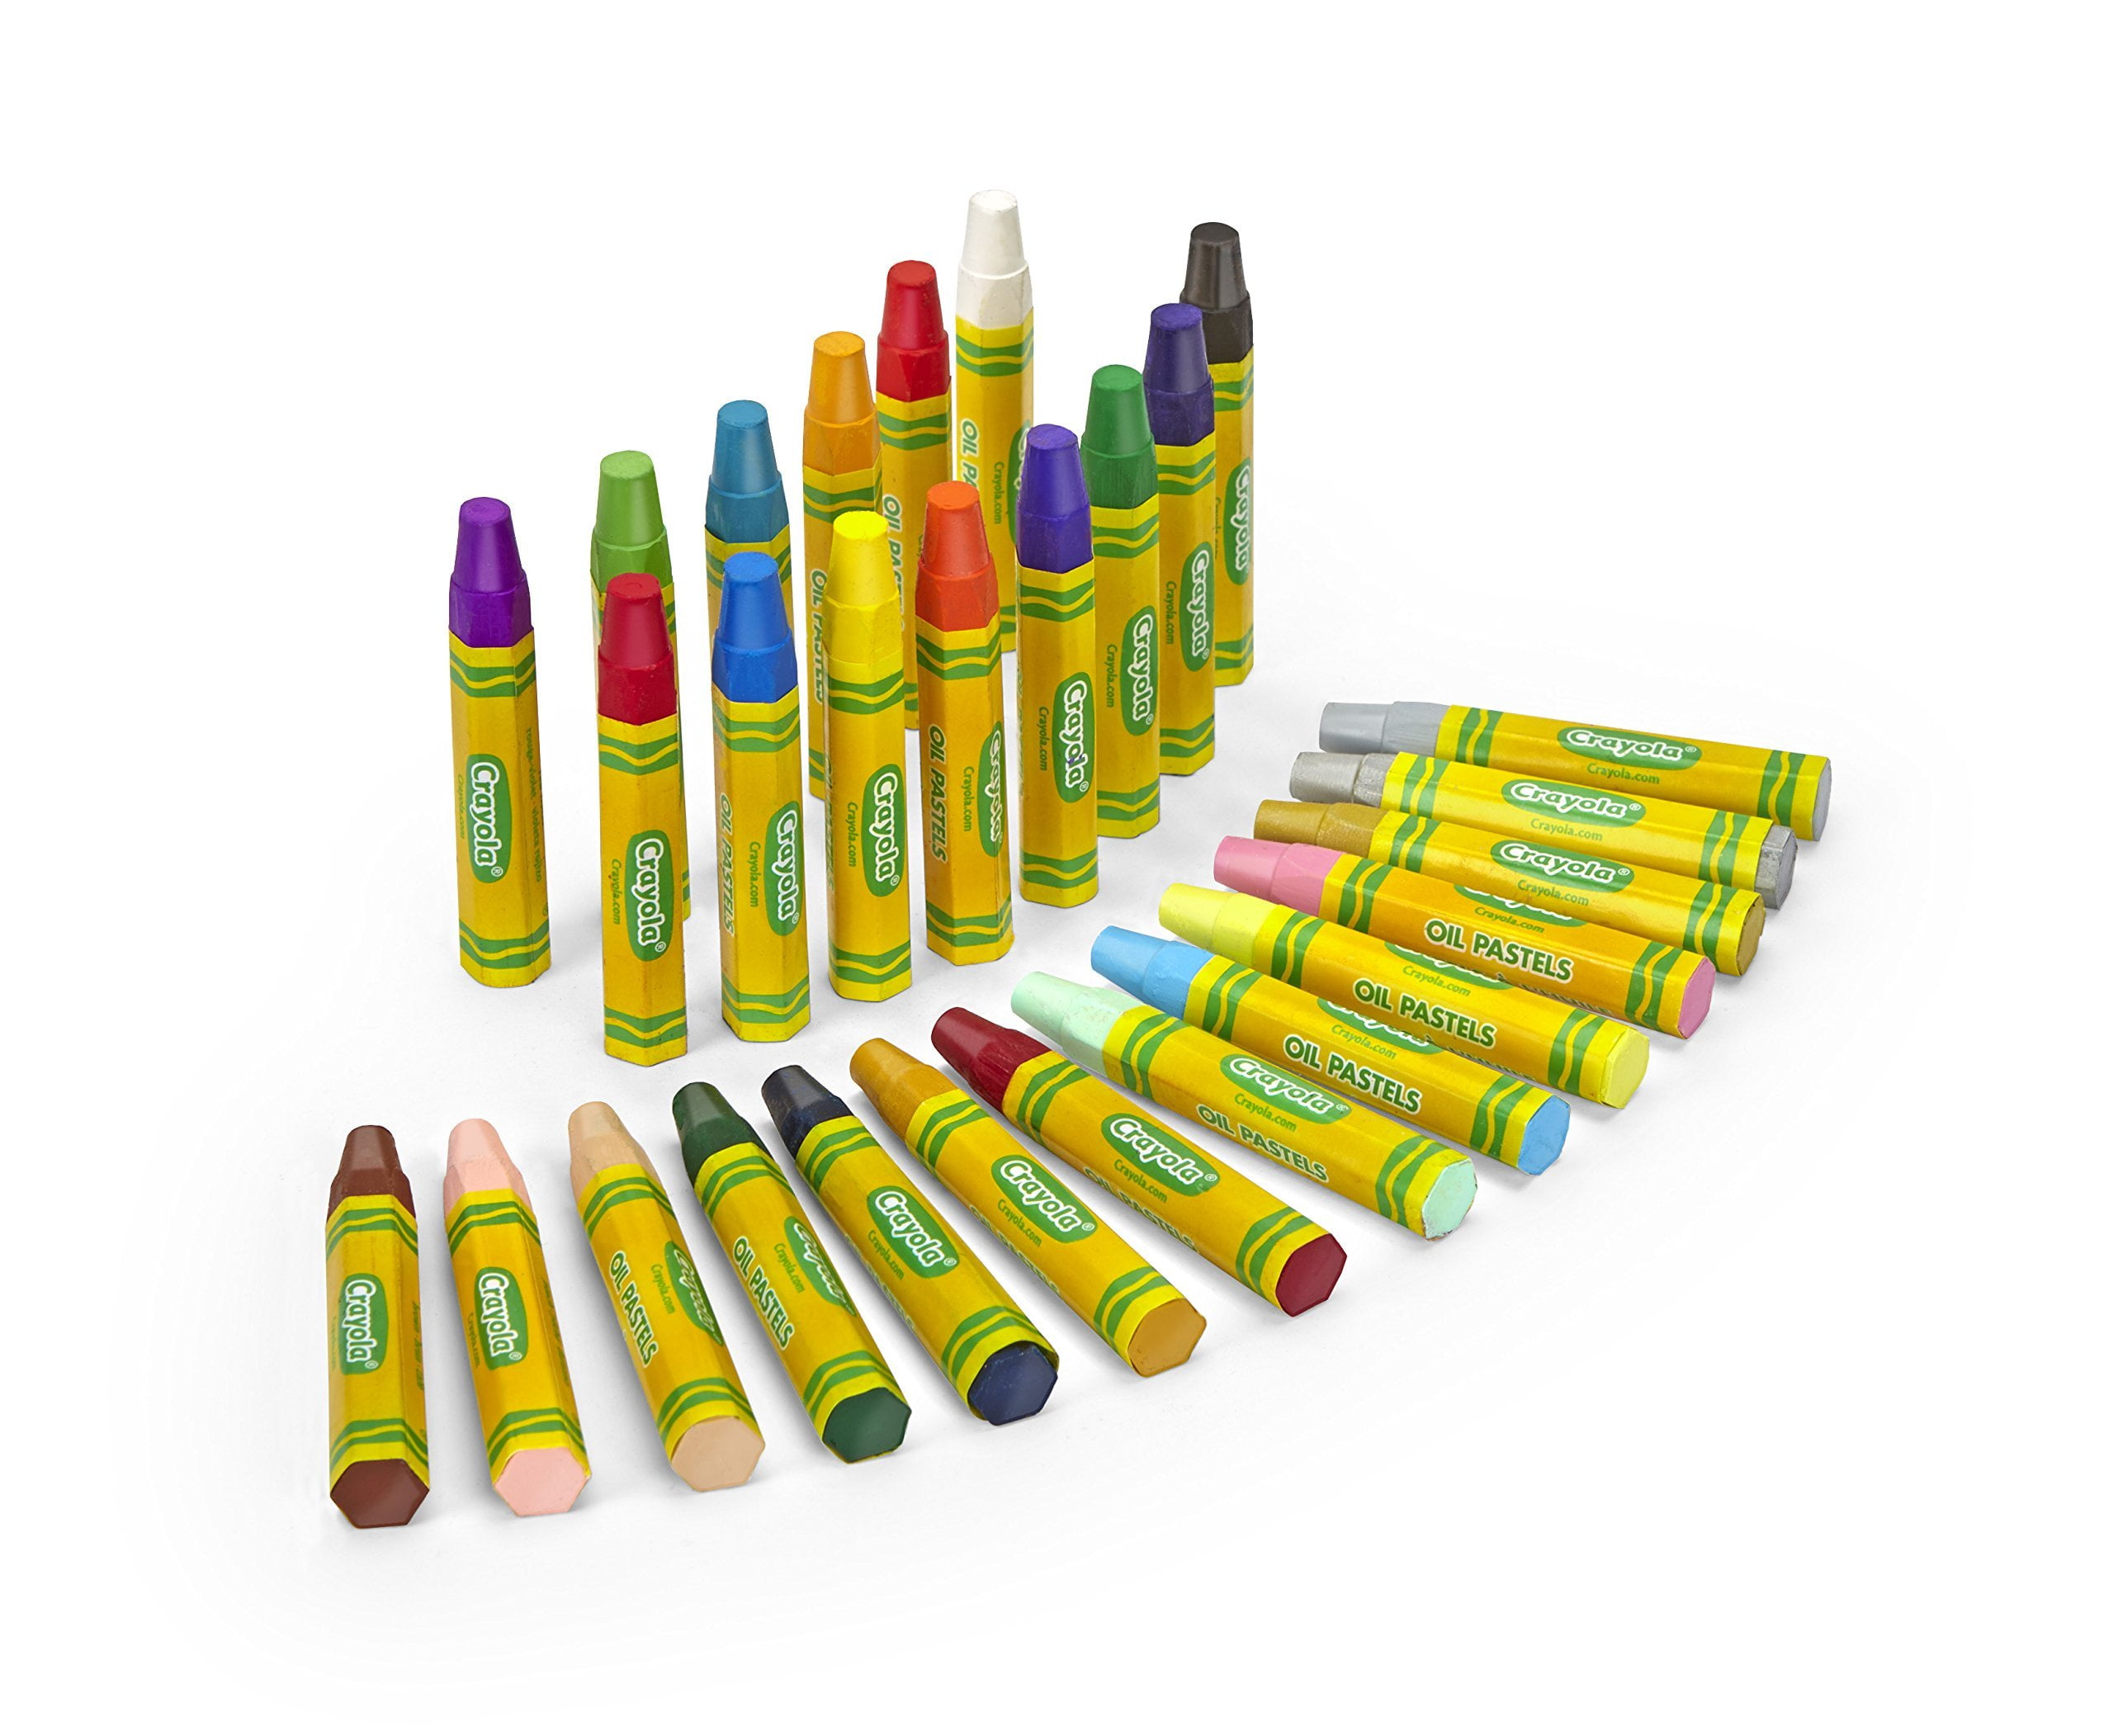 Strong Ideal for Kids 3 & Up Non-Toxic Blendable Long Lasting Sticks Crayola Oil Pastels 28 Brilliant Opaque Colors Large Hexagonal Shape Pastels 